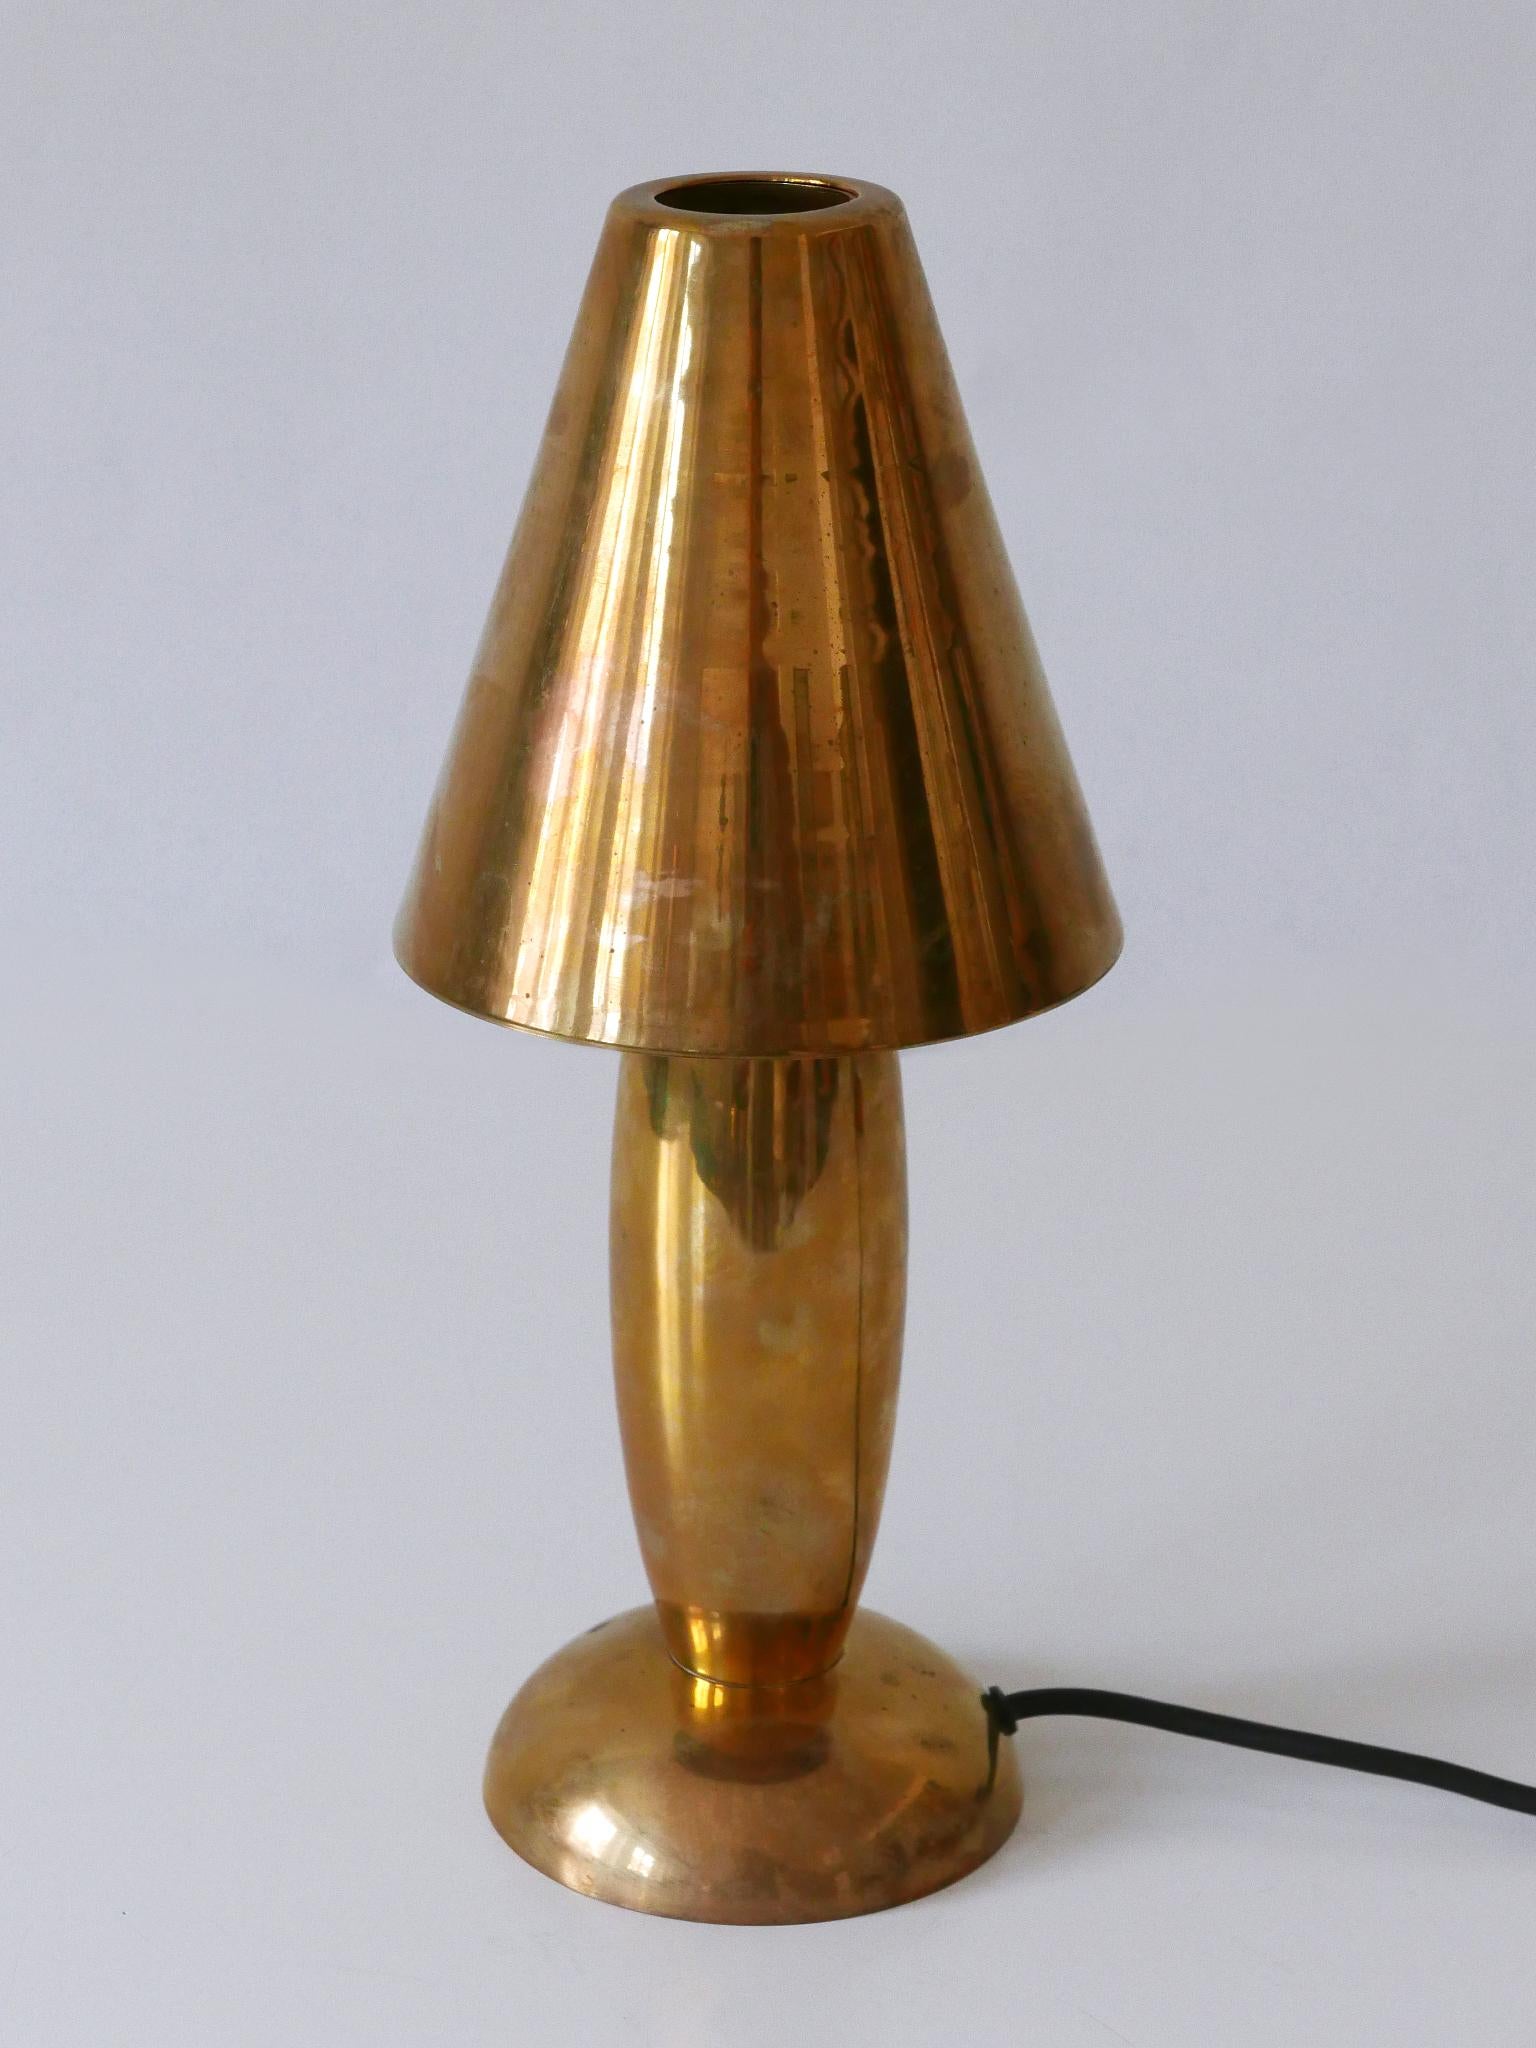 Rare & Lovely Mid-Century Modern Brass Side Table Lamp by Lambert Germany 1970s For Sale 1